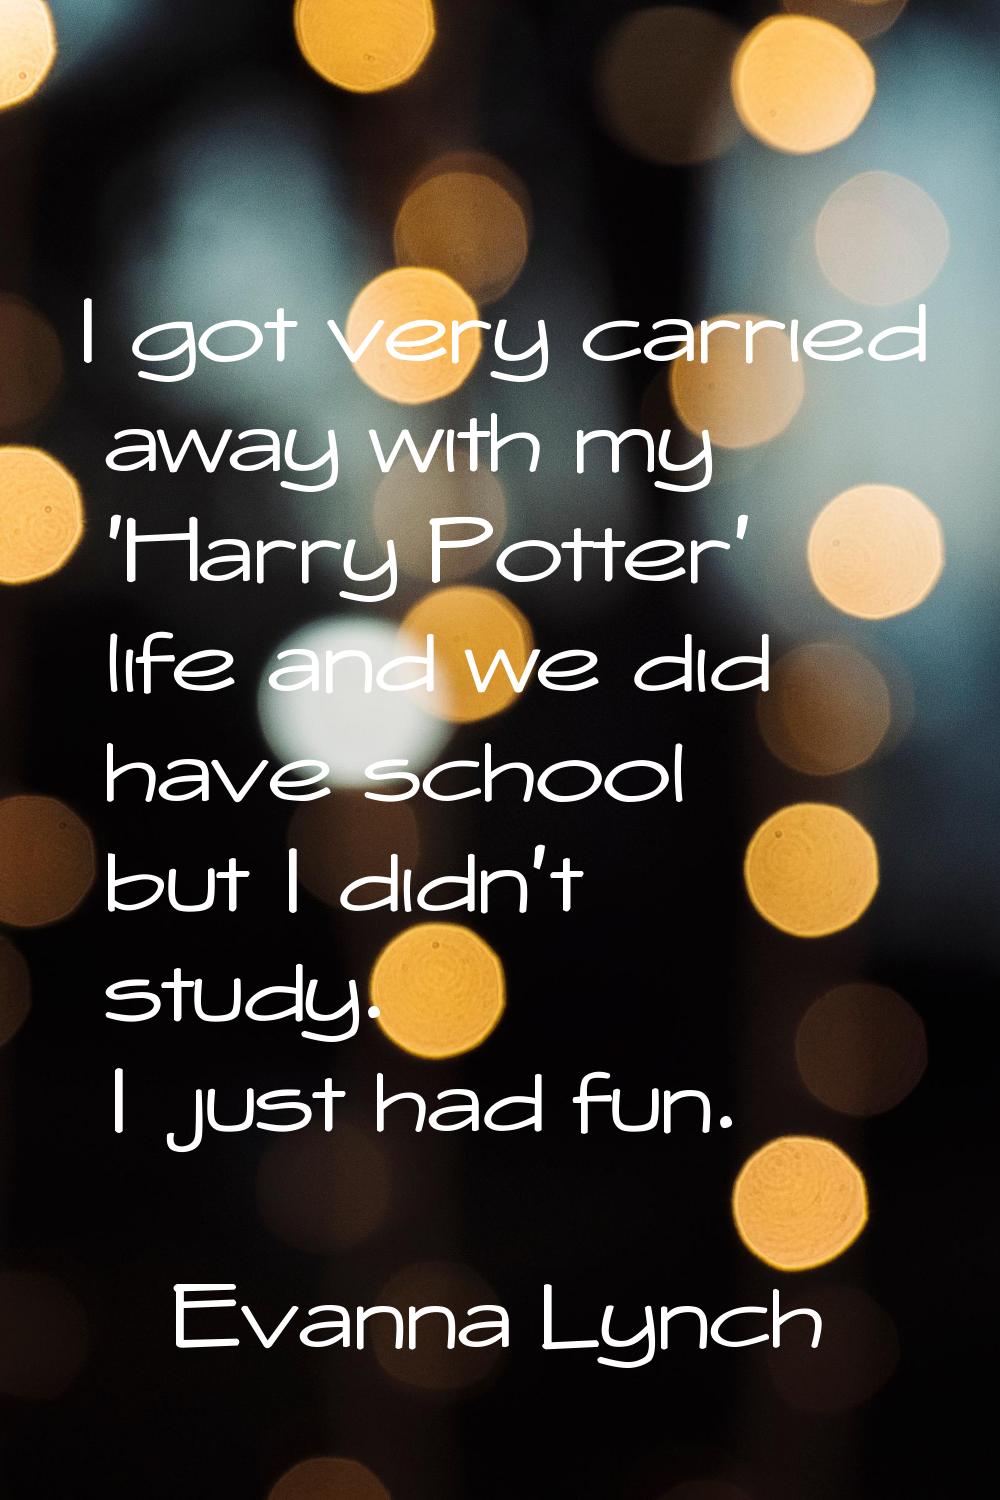 I got very carried away with my 'Harry Potter' life and we did have school but I didn't study. I ju